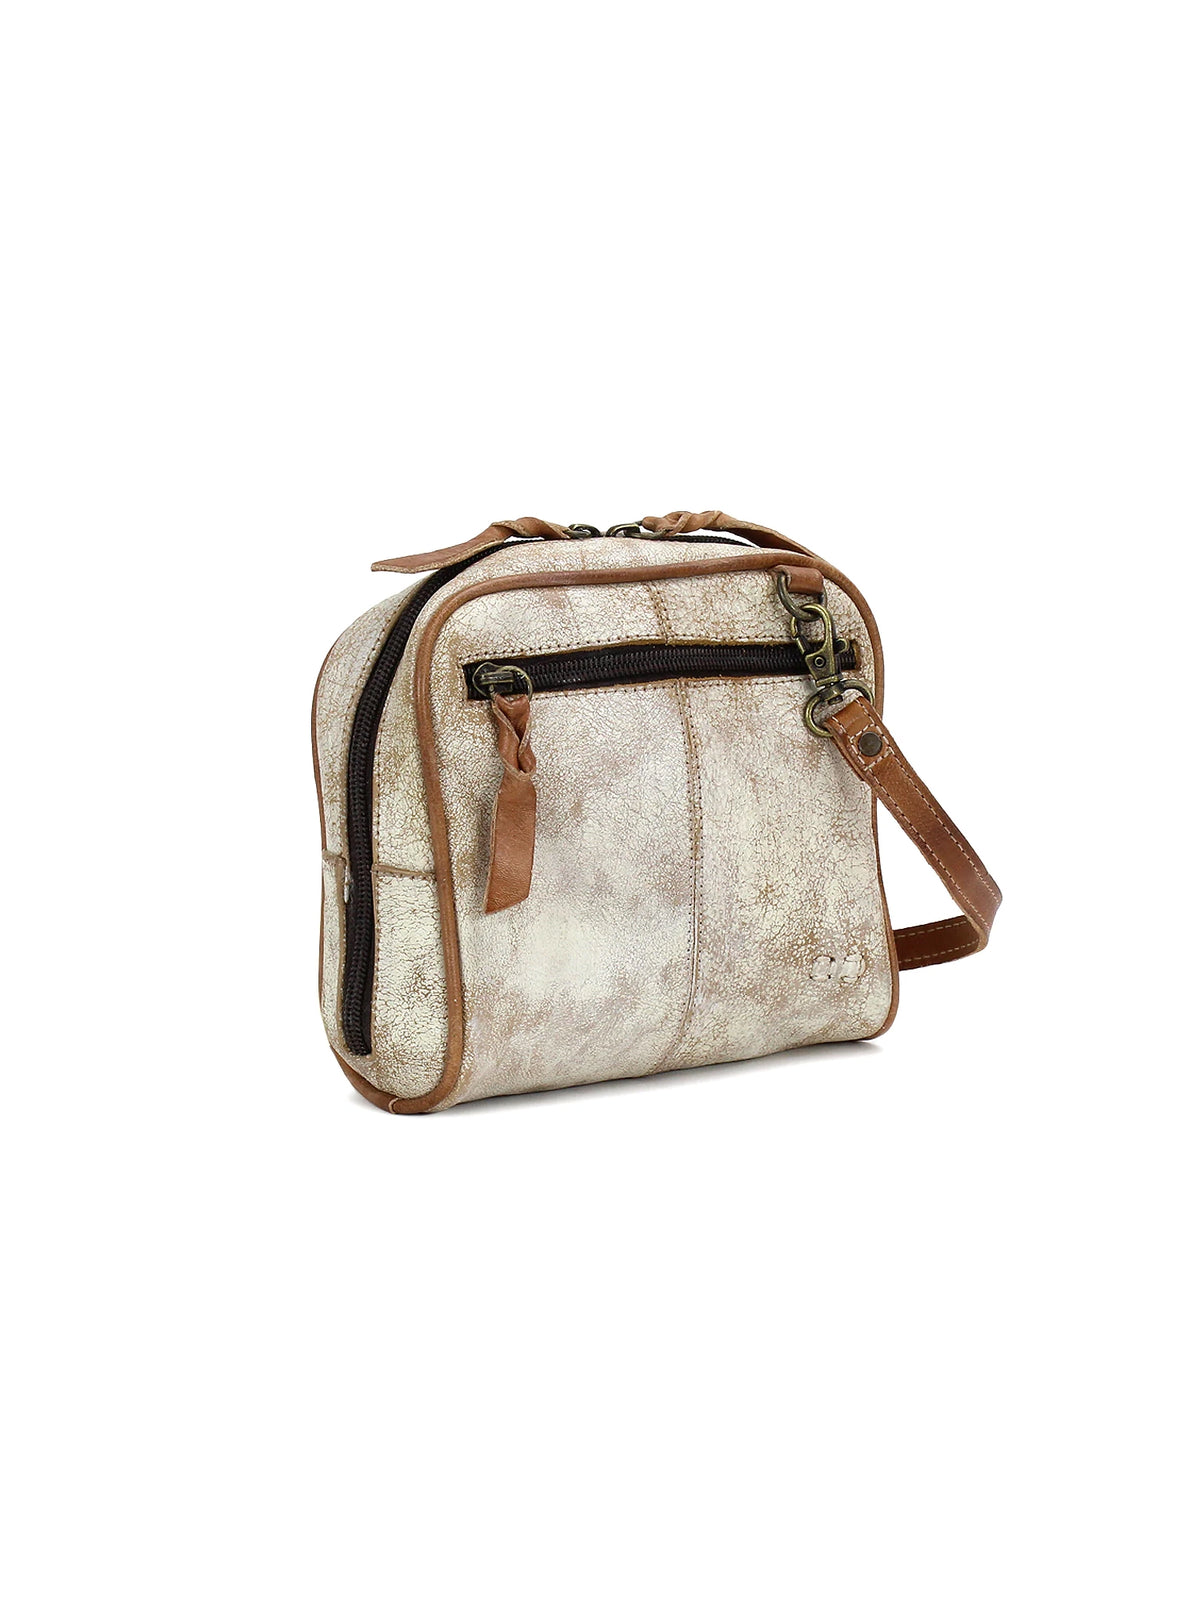 BEDSTU capture two-tone crossbody bag in nectar luxe tan rustic leather